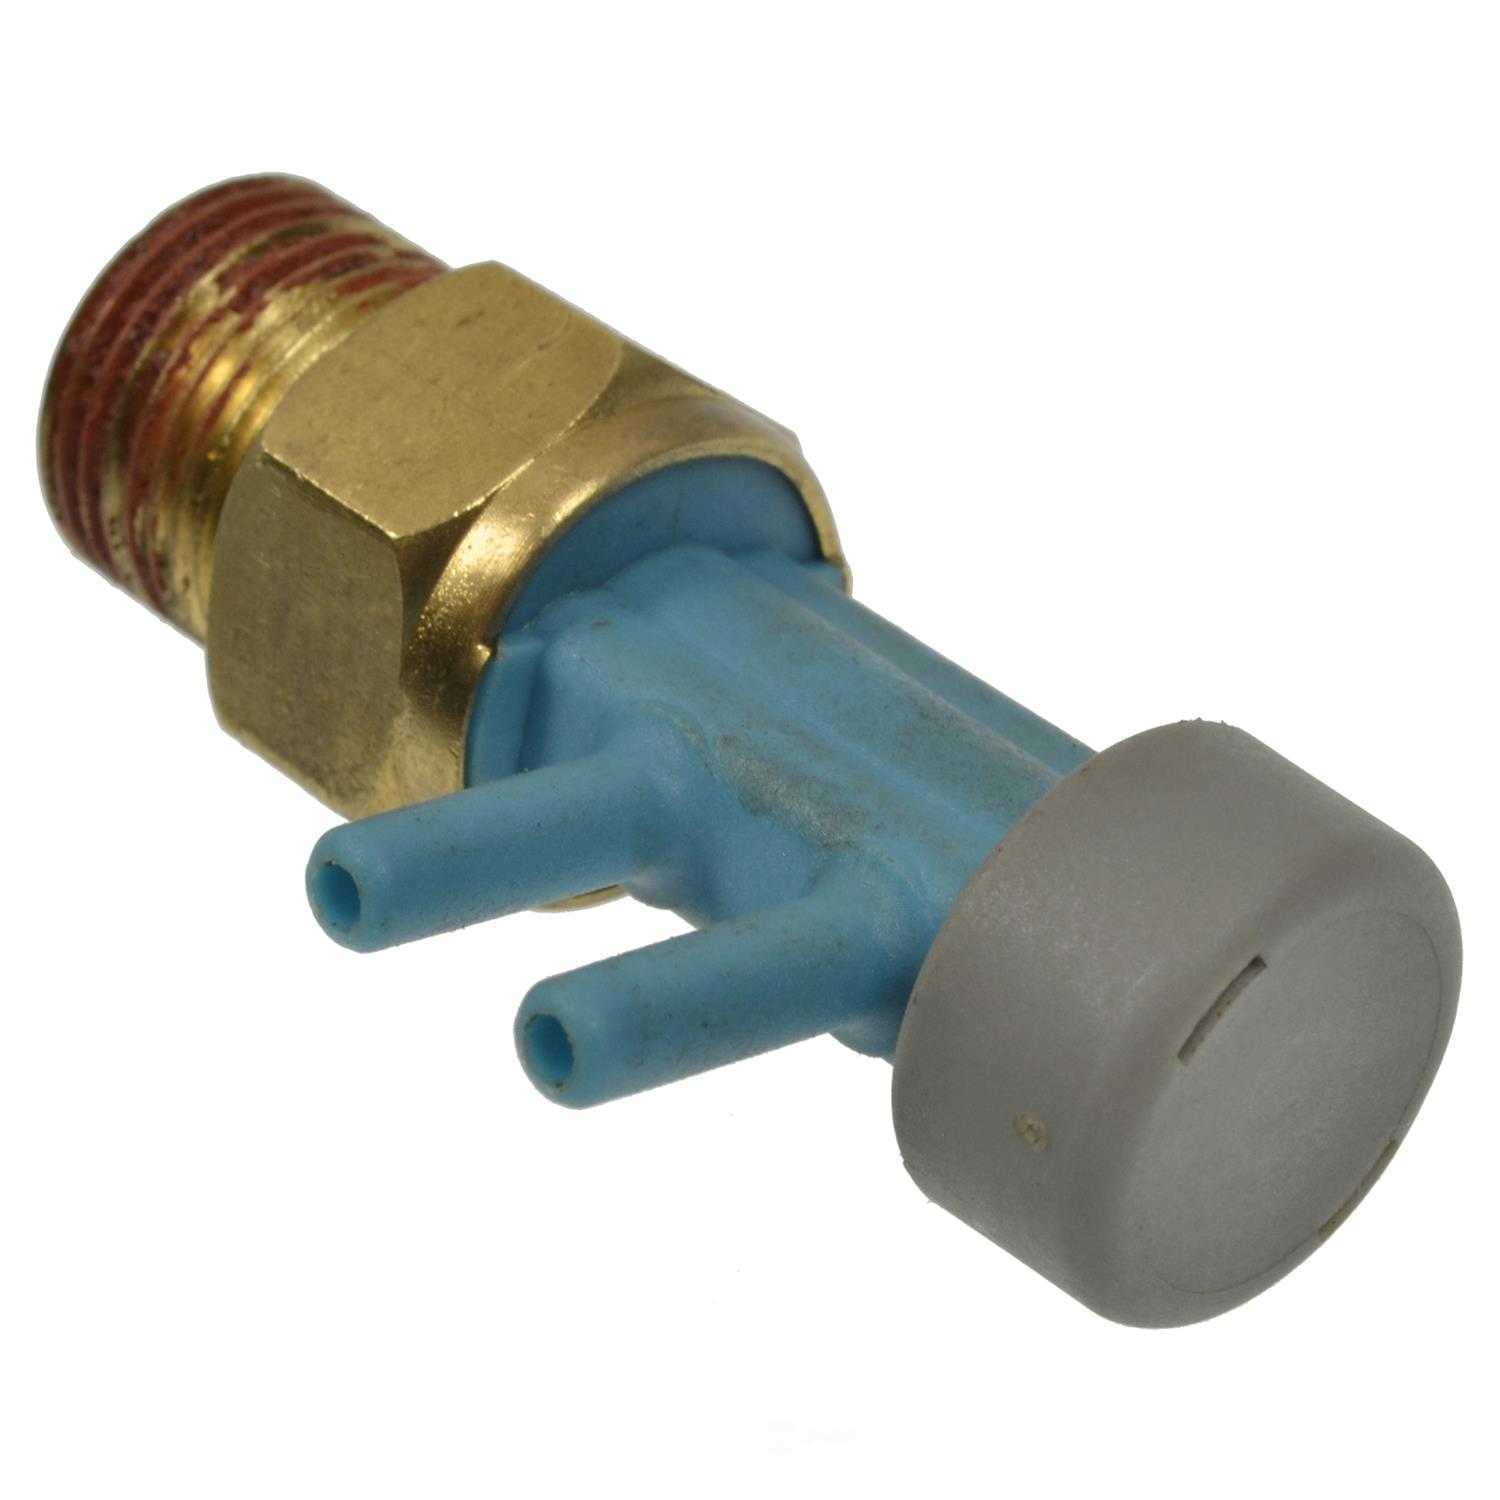 STANDARD MOTOR PRODUCTS - Ported Vacuum Switch - STA PVS147